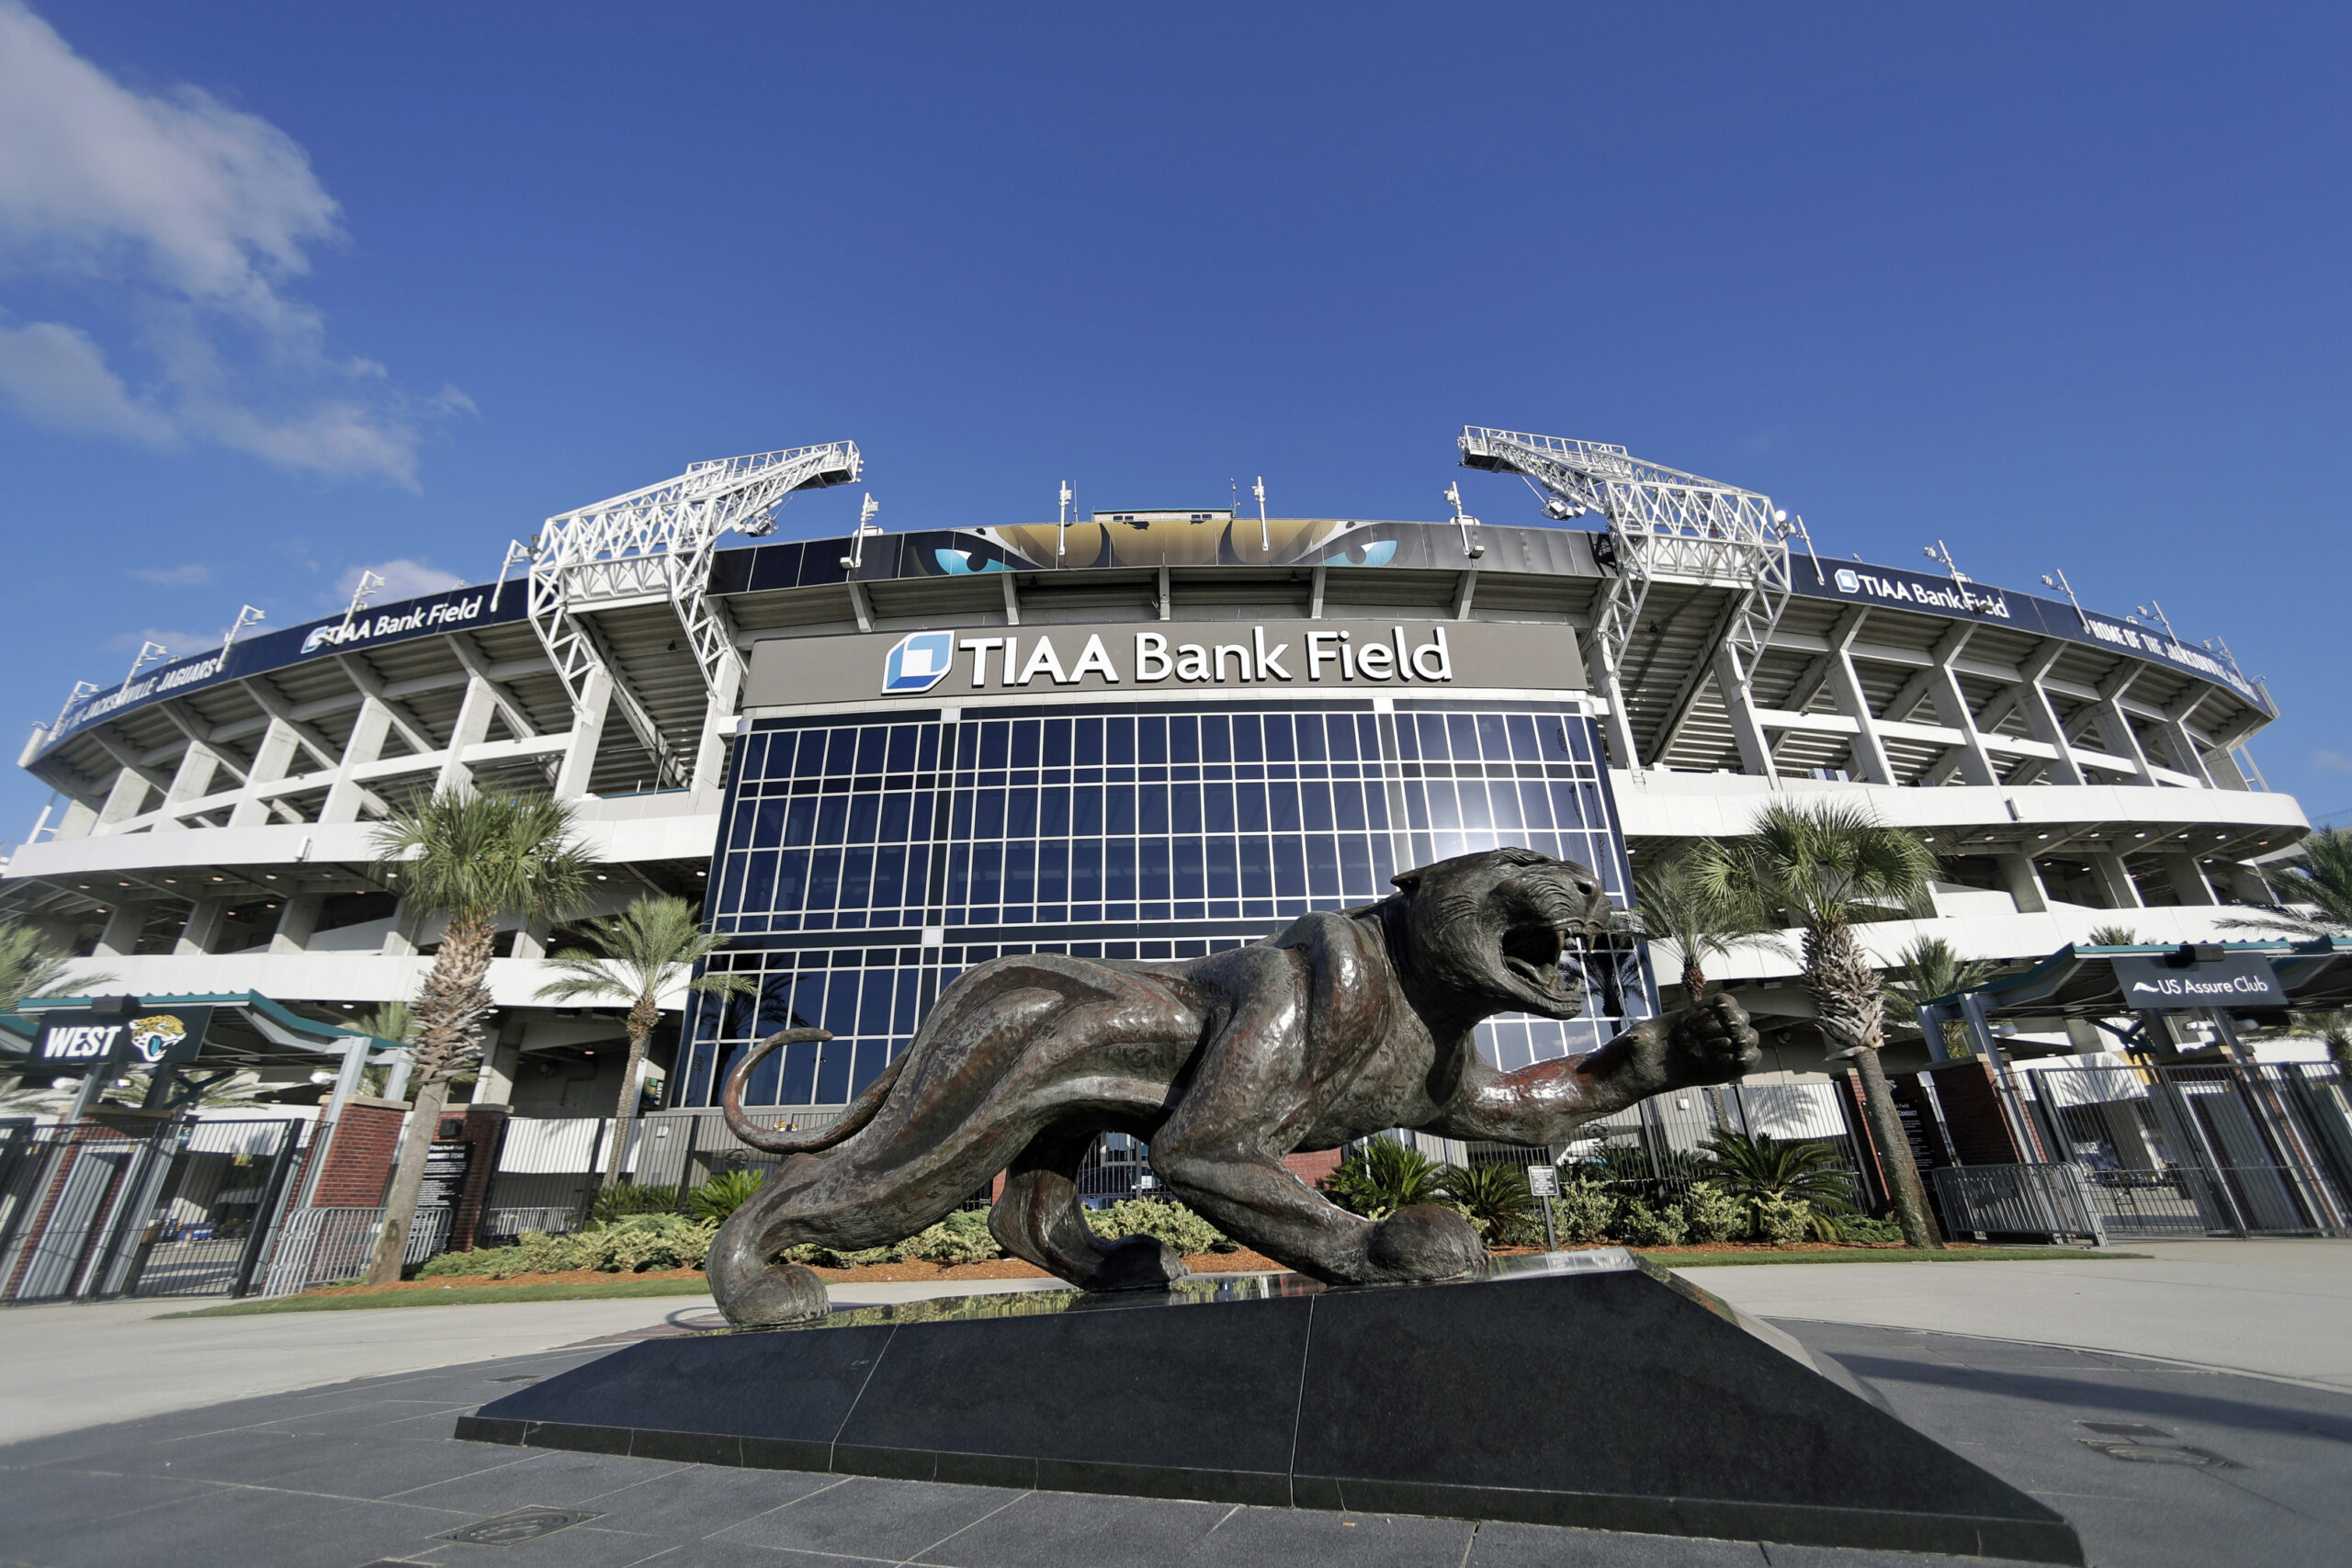 The Green Bay Packers will kick off their season in Jacksonville